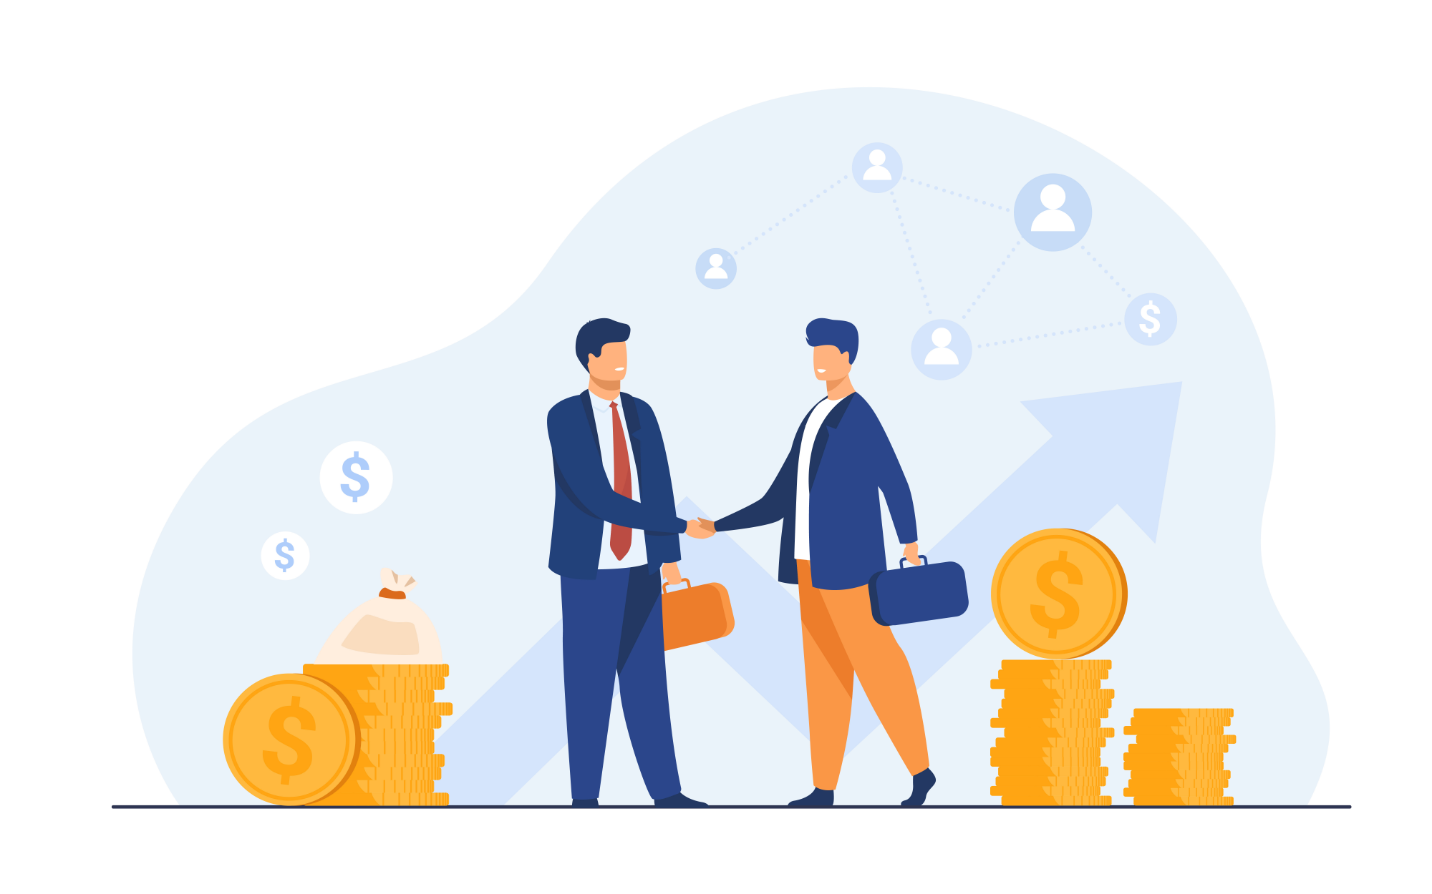 illustration of two man making a deal